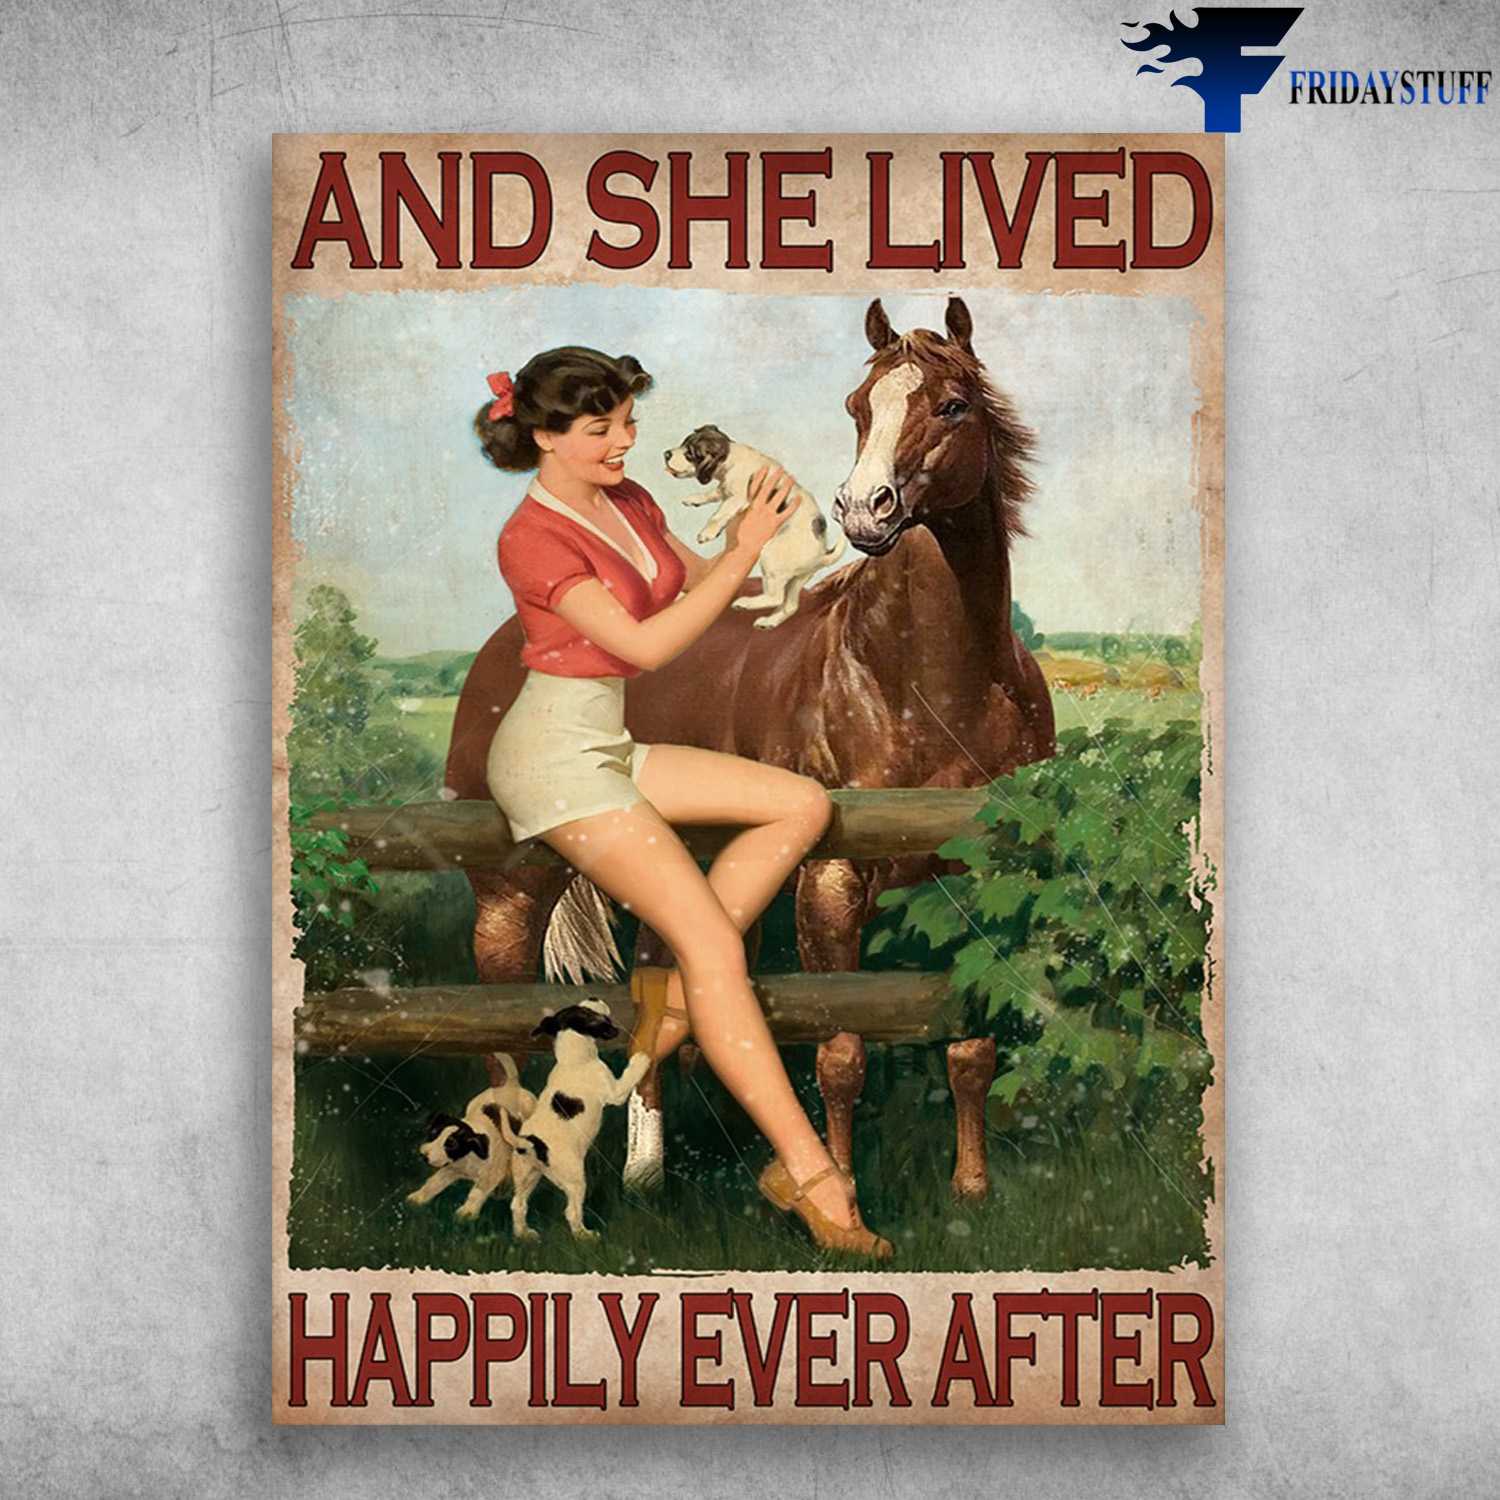 Lady Loves Dog, Dog And Horse - And She Lived, Happily Ever After